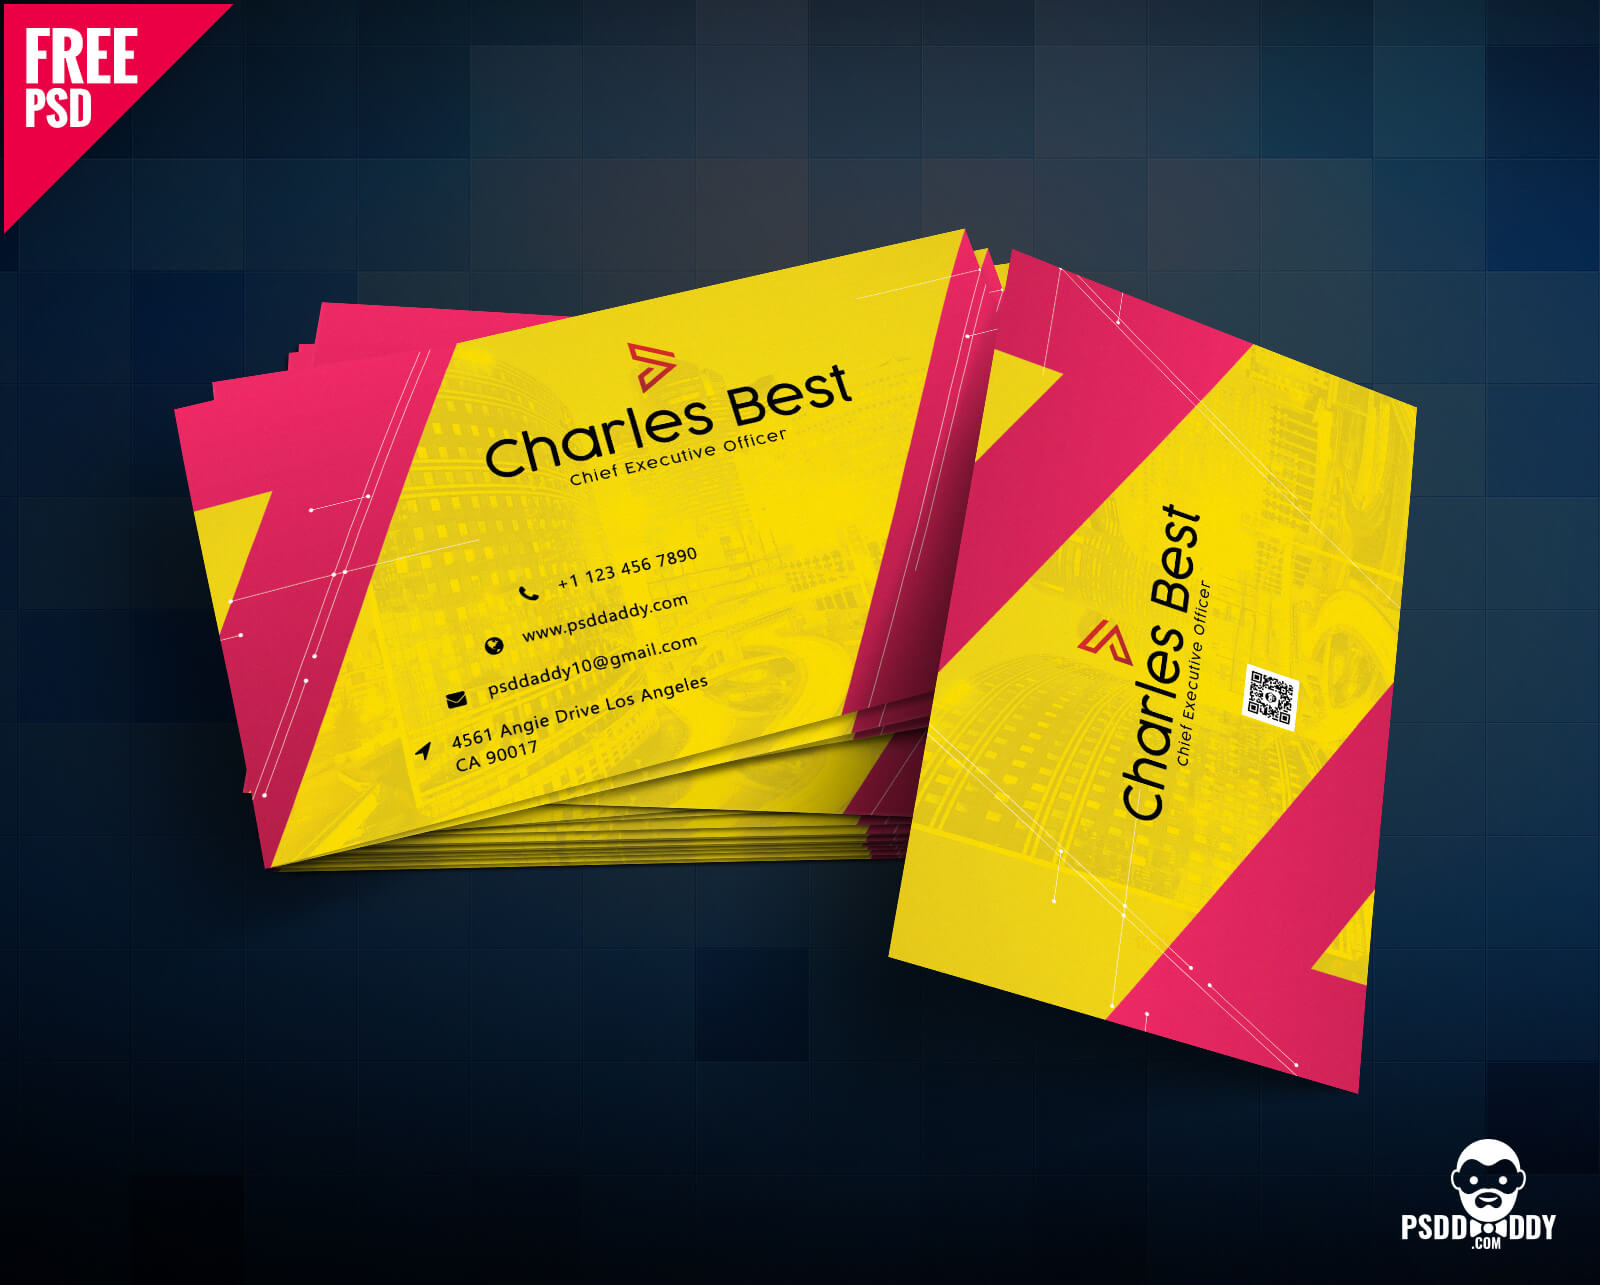 Download] Creative Business Card Free Psd | Psddaddy Throughout Business Card Size Template Psd